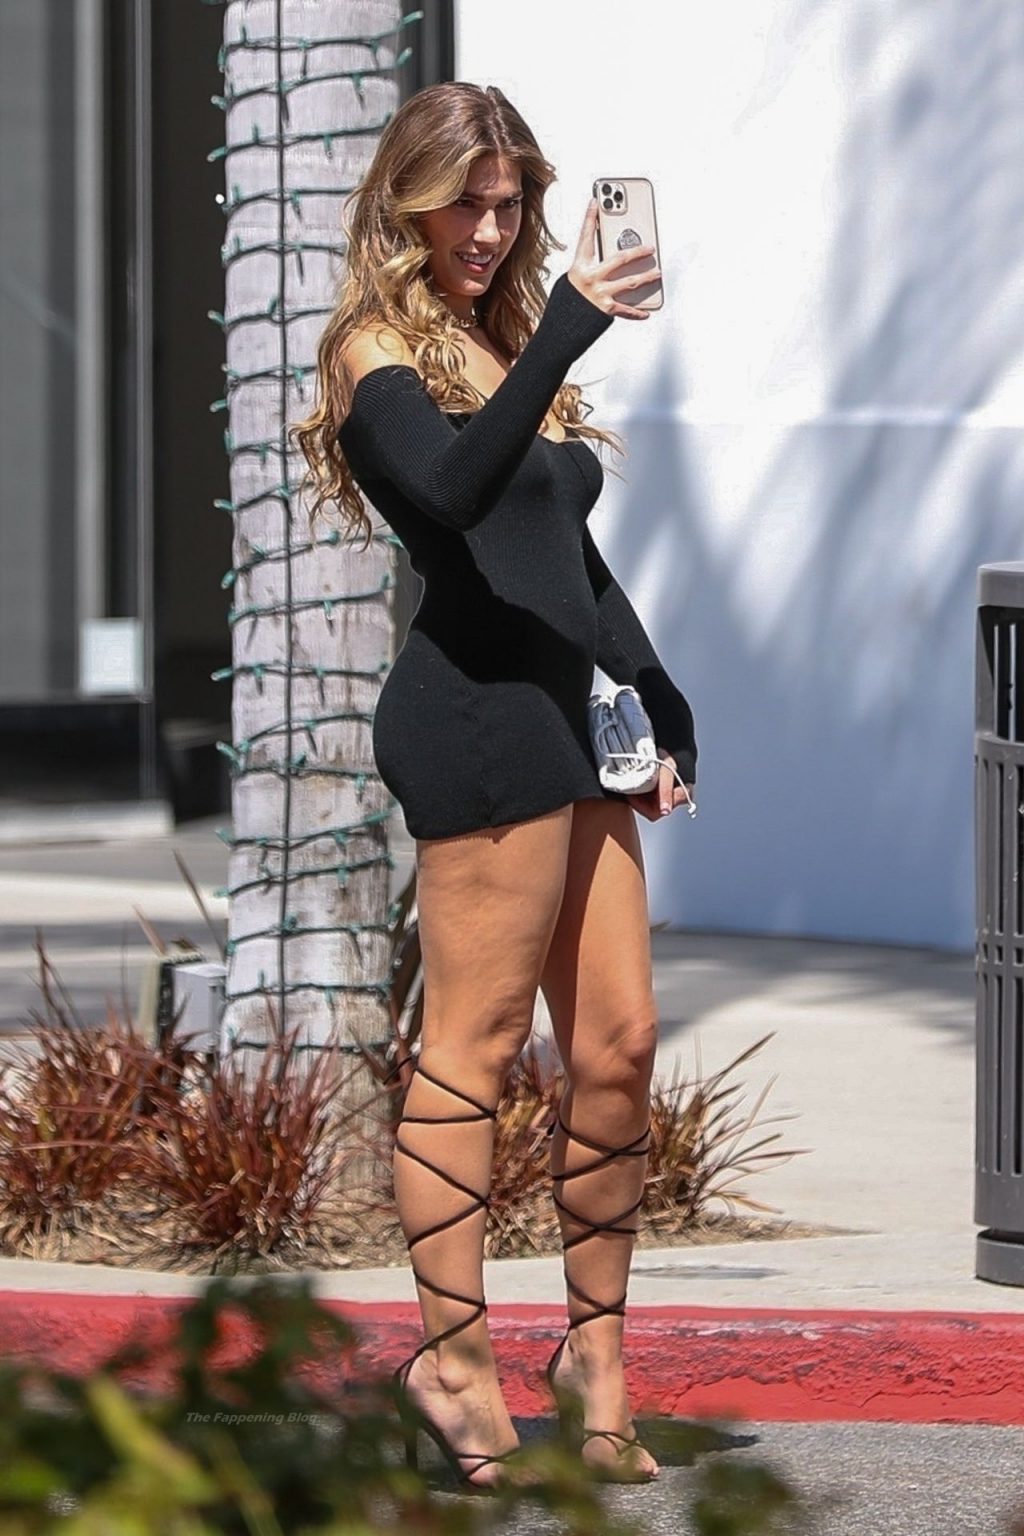 Kara Del Toro Poses up During a New Photoshoot with Friends on Rodeo Drive (50 Photos)